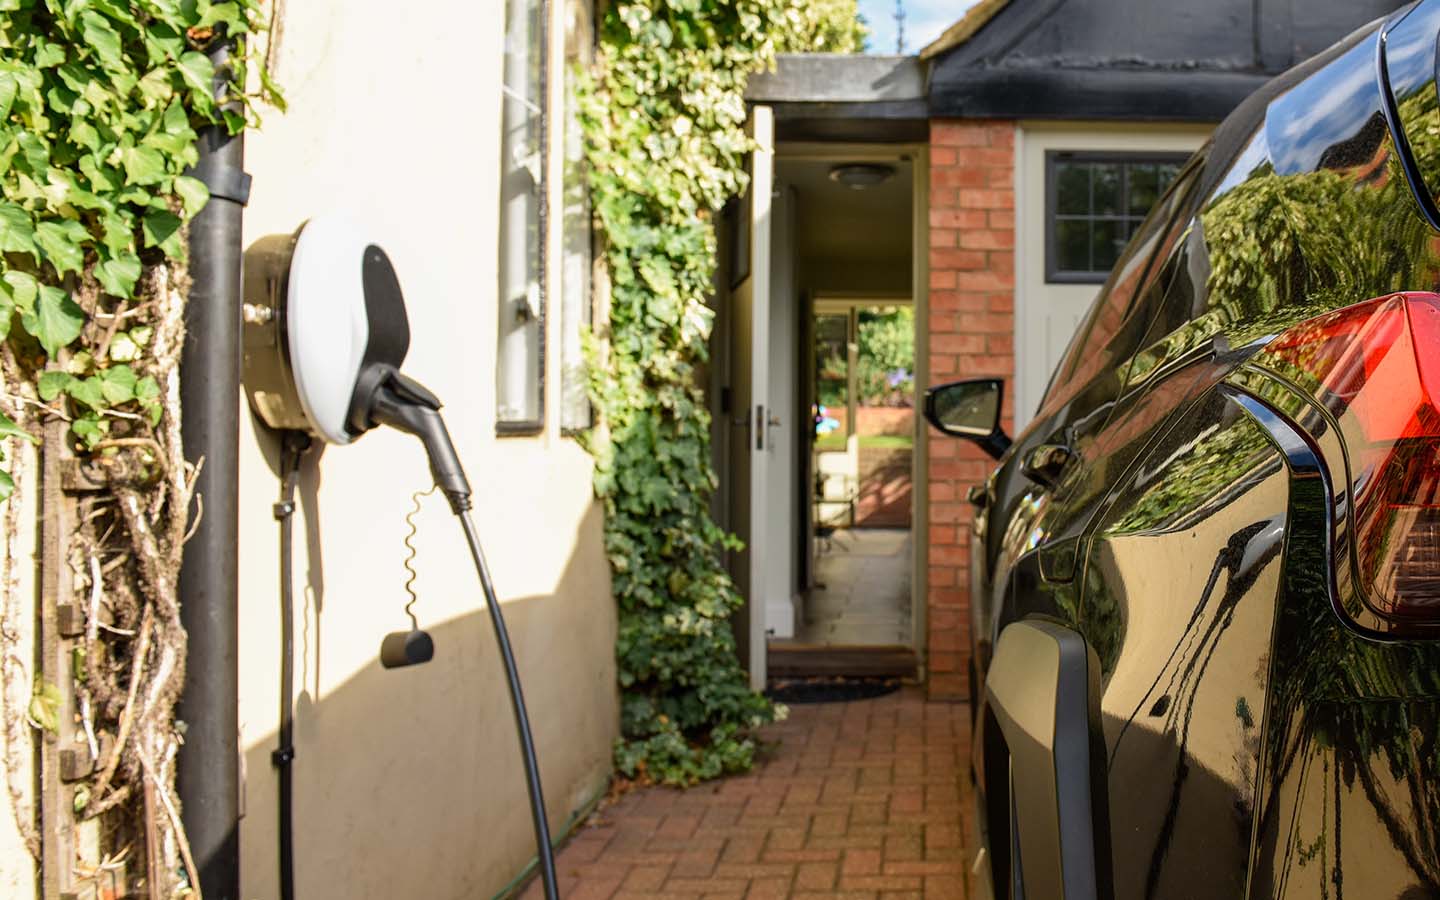 ev chargers are available for home for easy charging